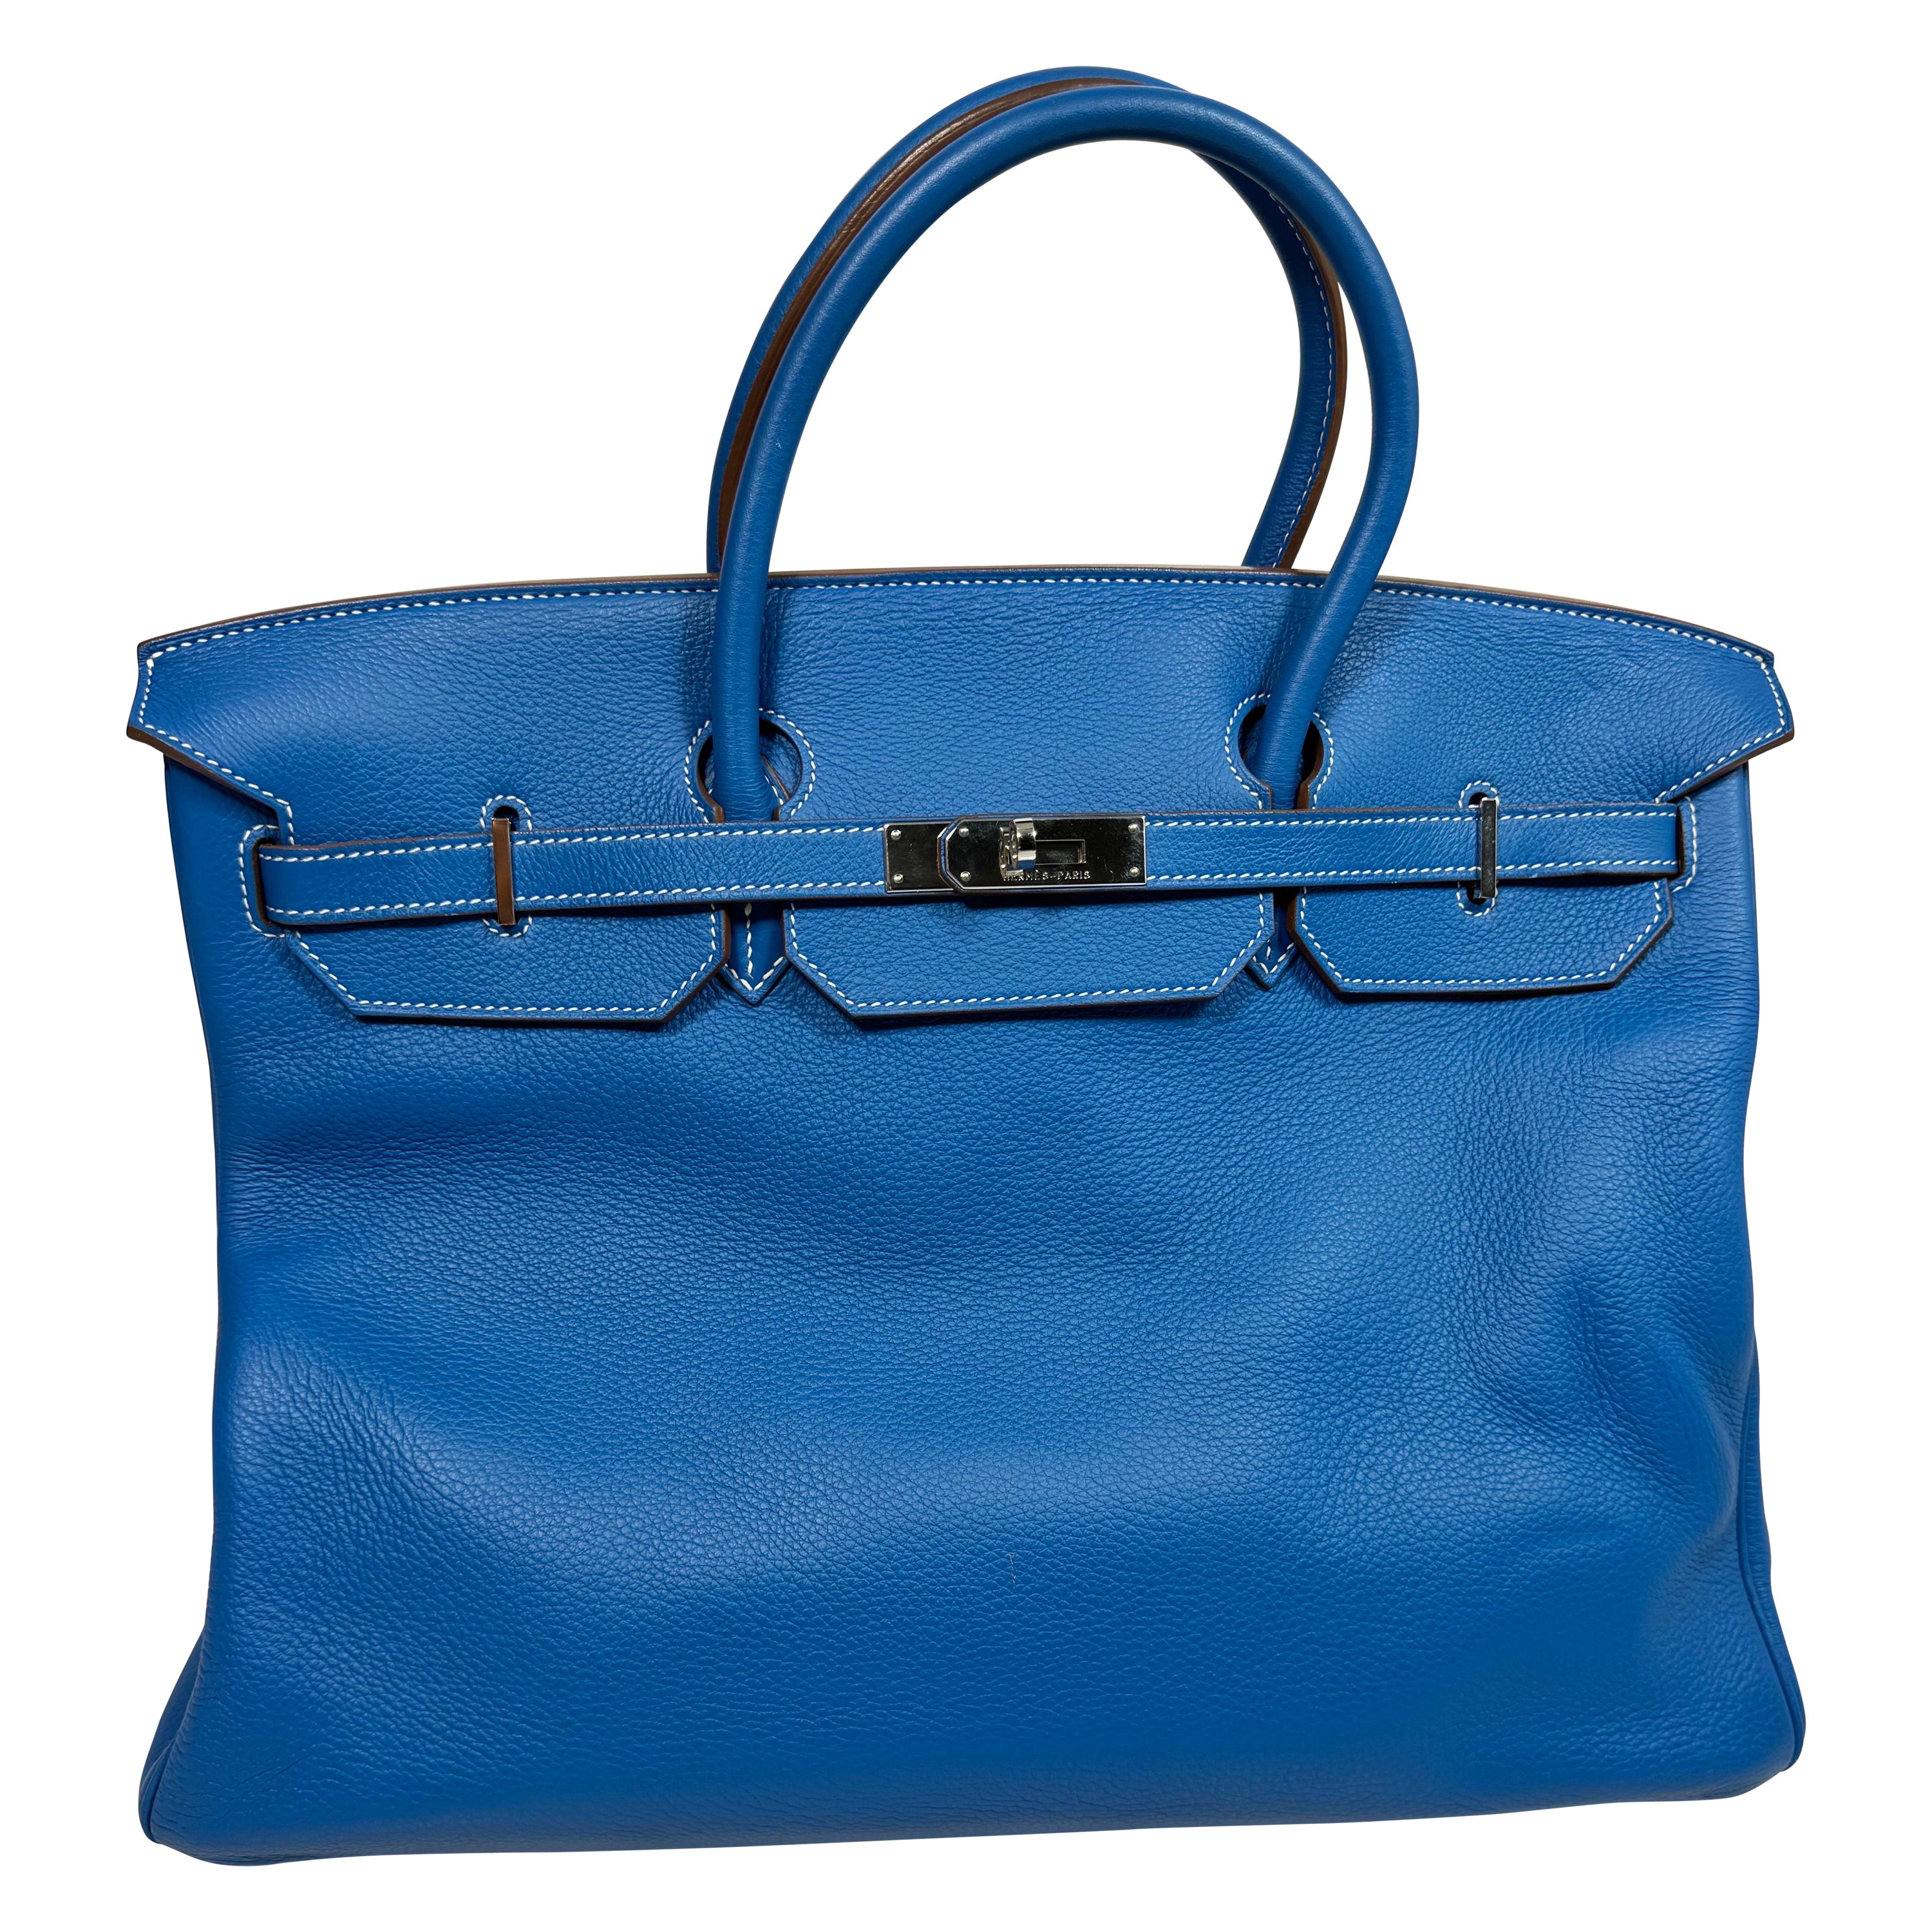 Hermes 40cm  Mykonos Blue and White Clemence Limited edition Birkin-SHW -2011 For Sale